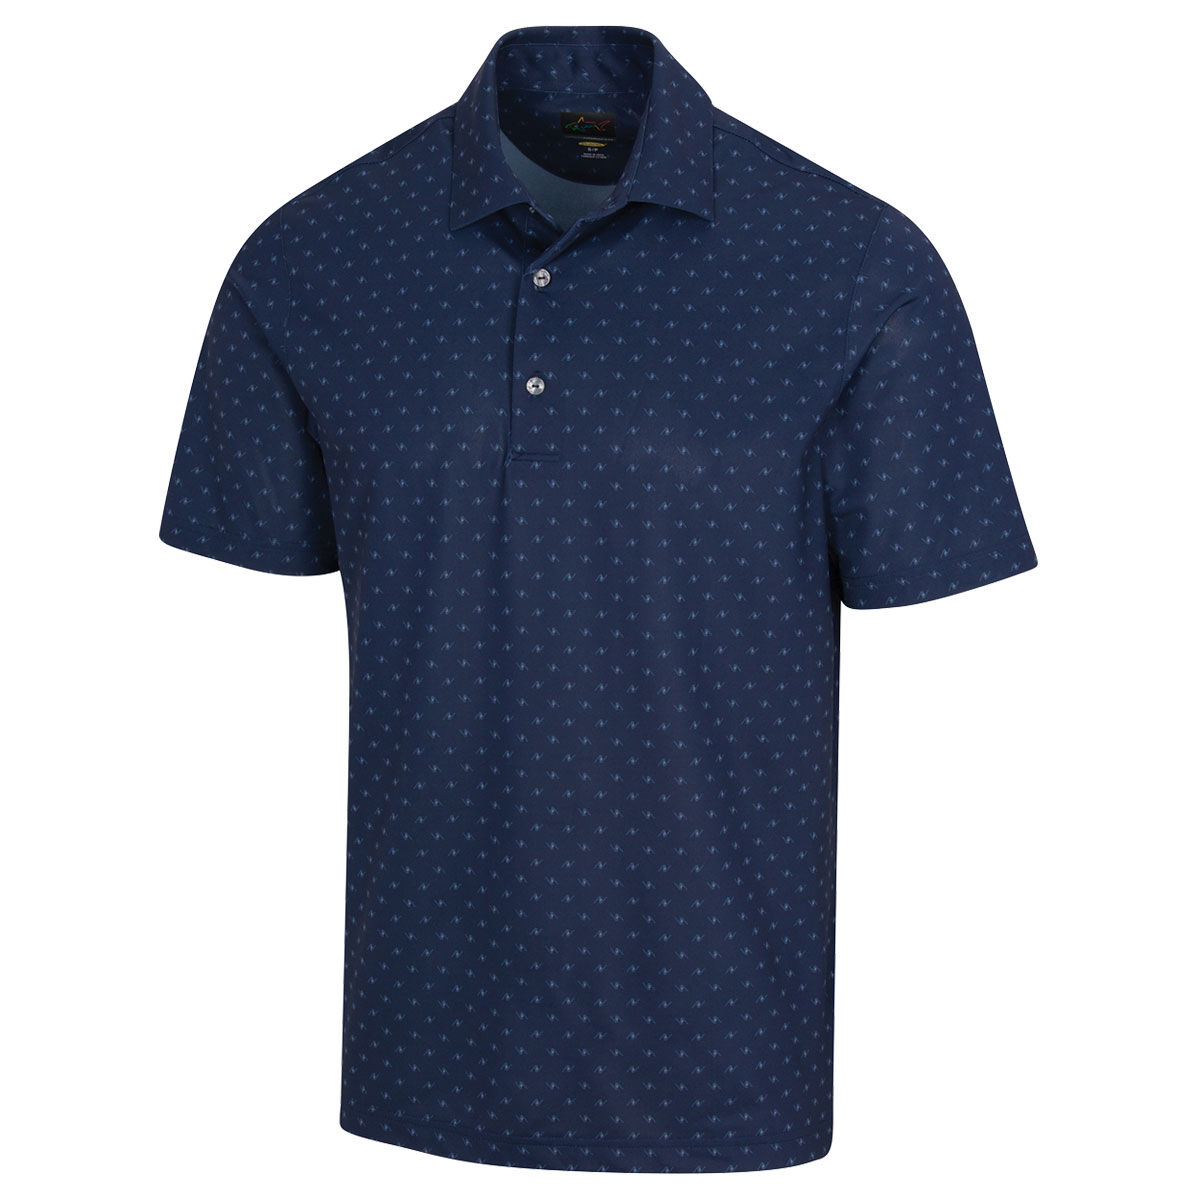 Greg Norman Men’s Navy Blue and White Freedom Micro Pique Spinner Print Golf Polo Shirt, Size: Medium | American Golf